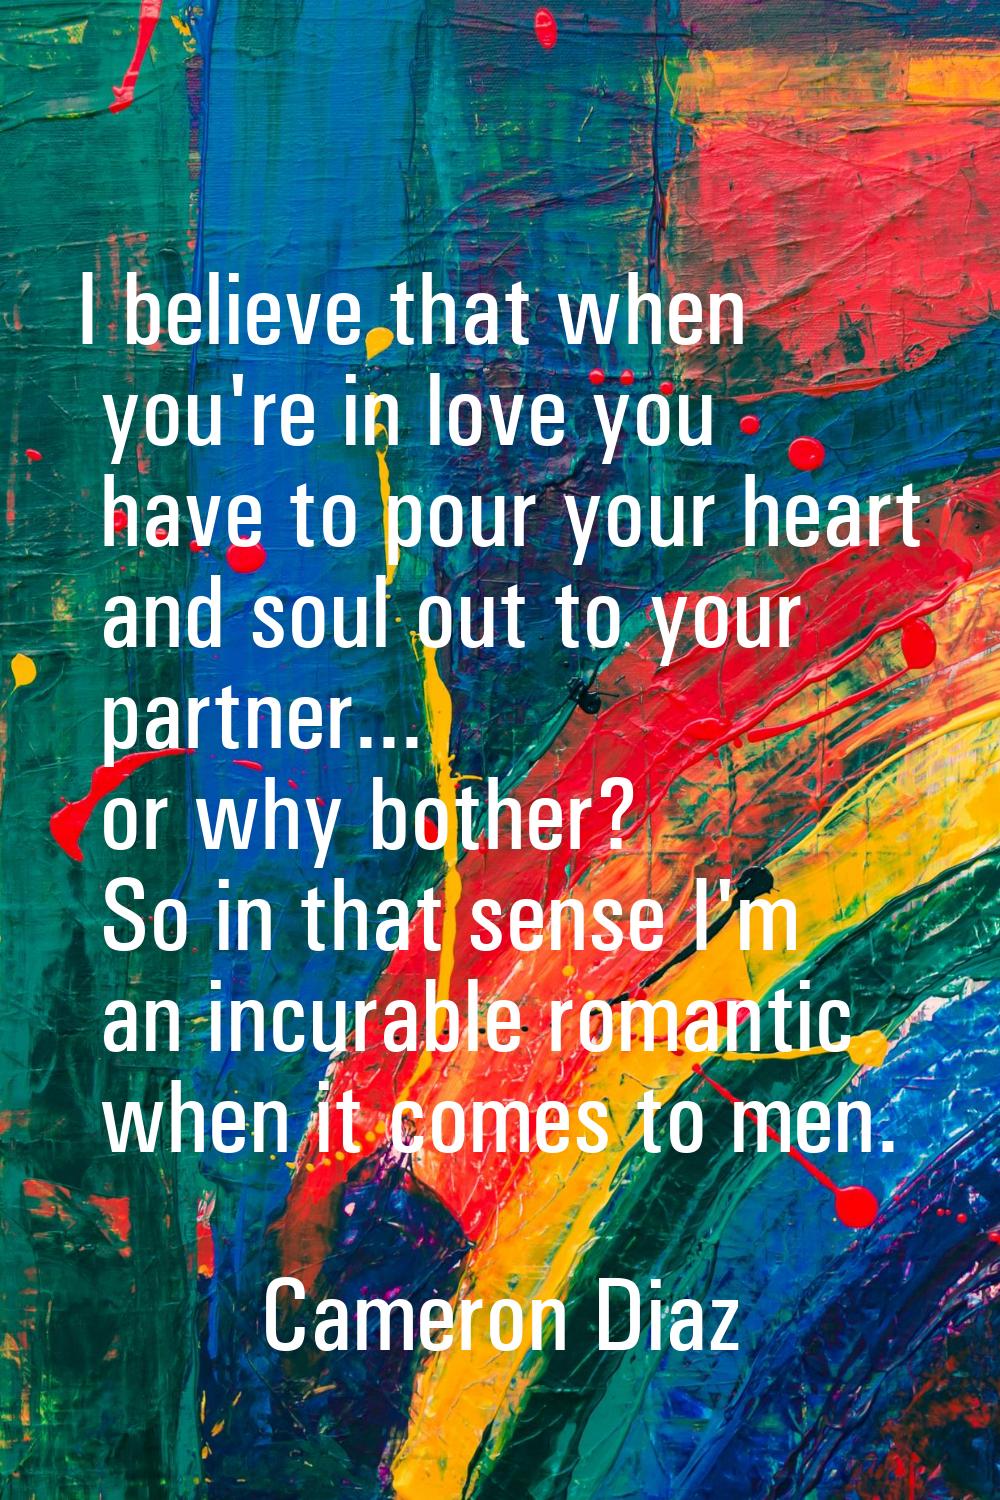 I believe that when you're in love you have to pour your heart and soul out to your partner... or w